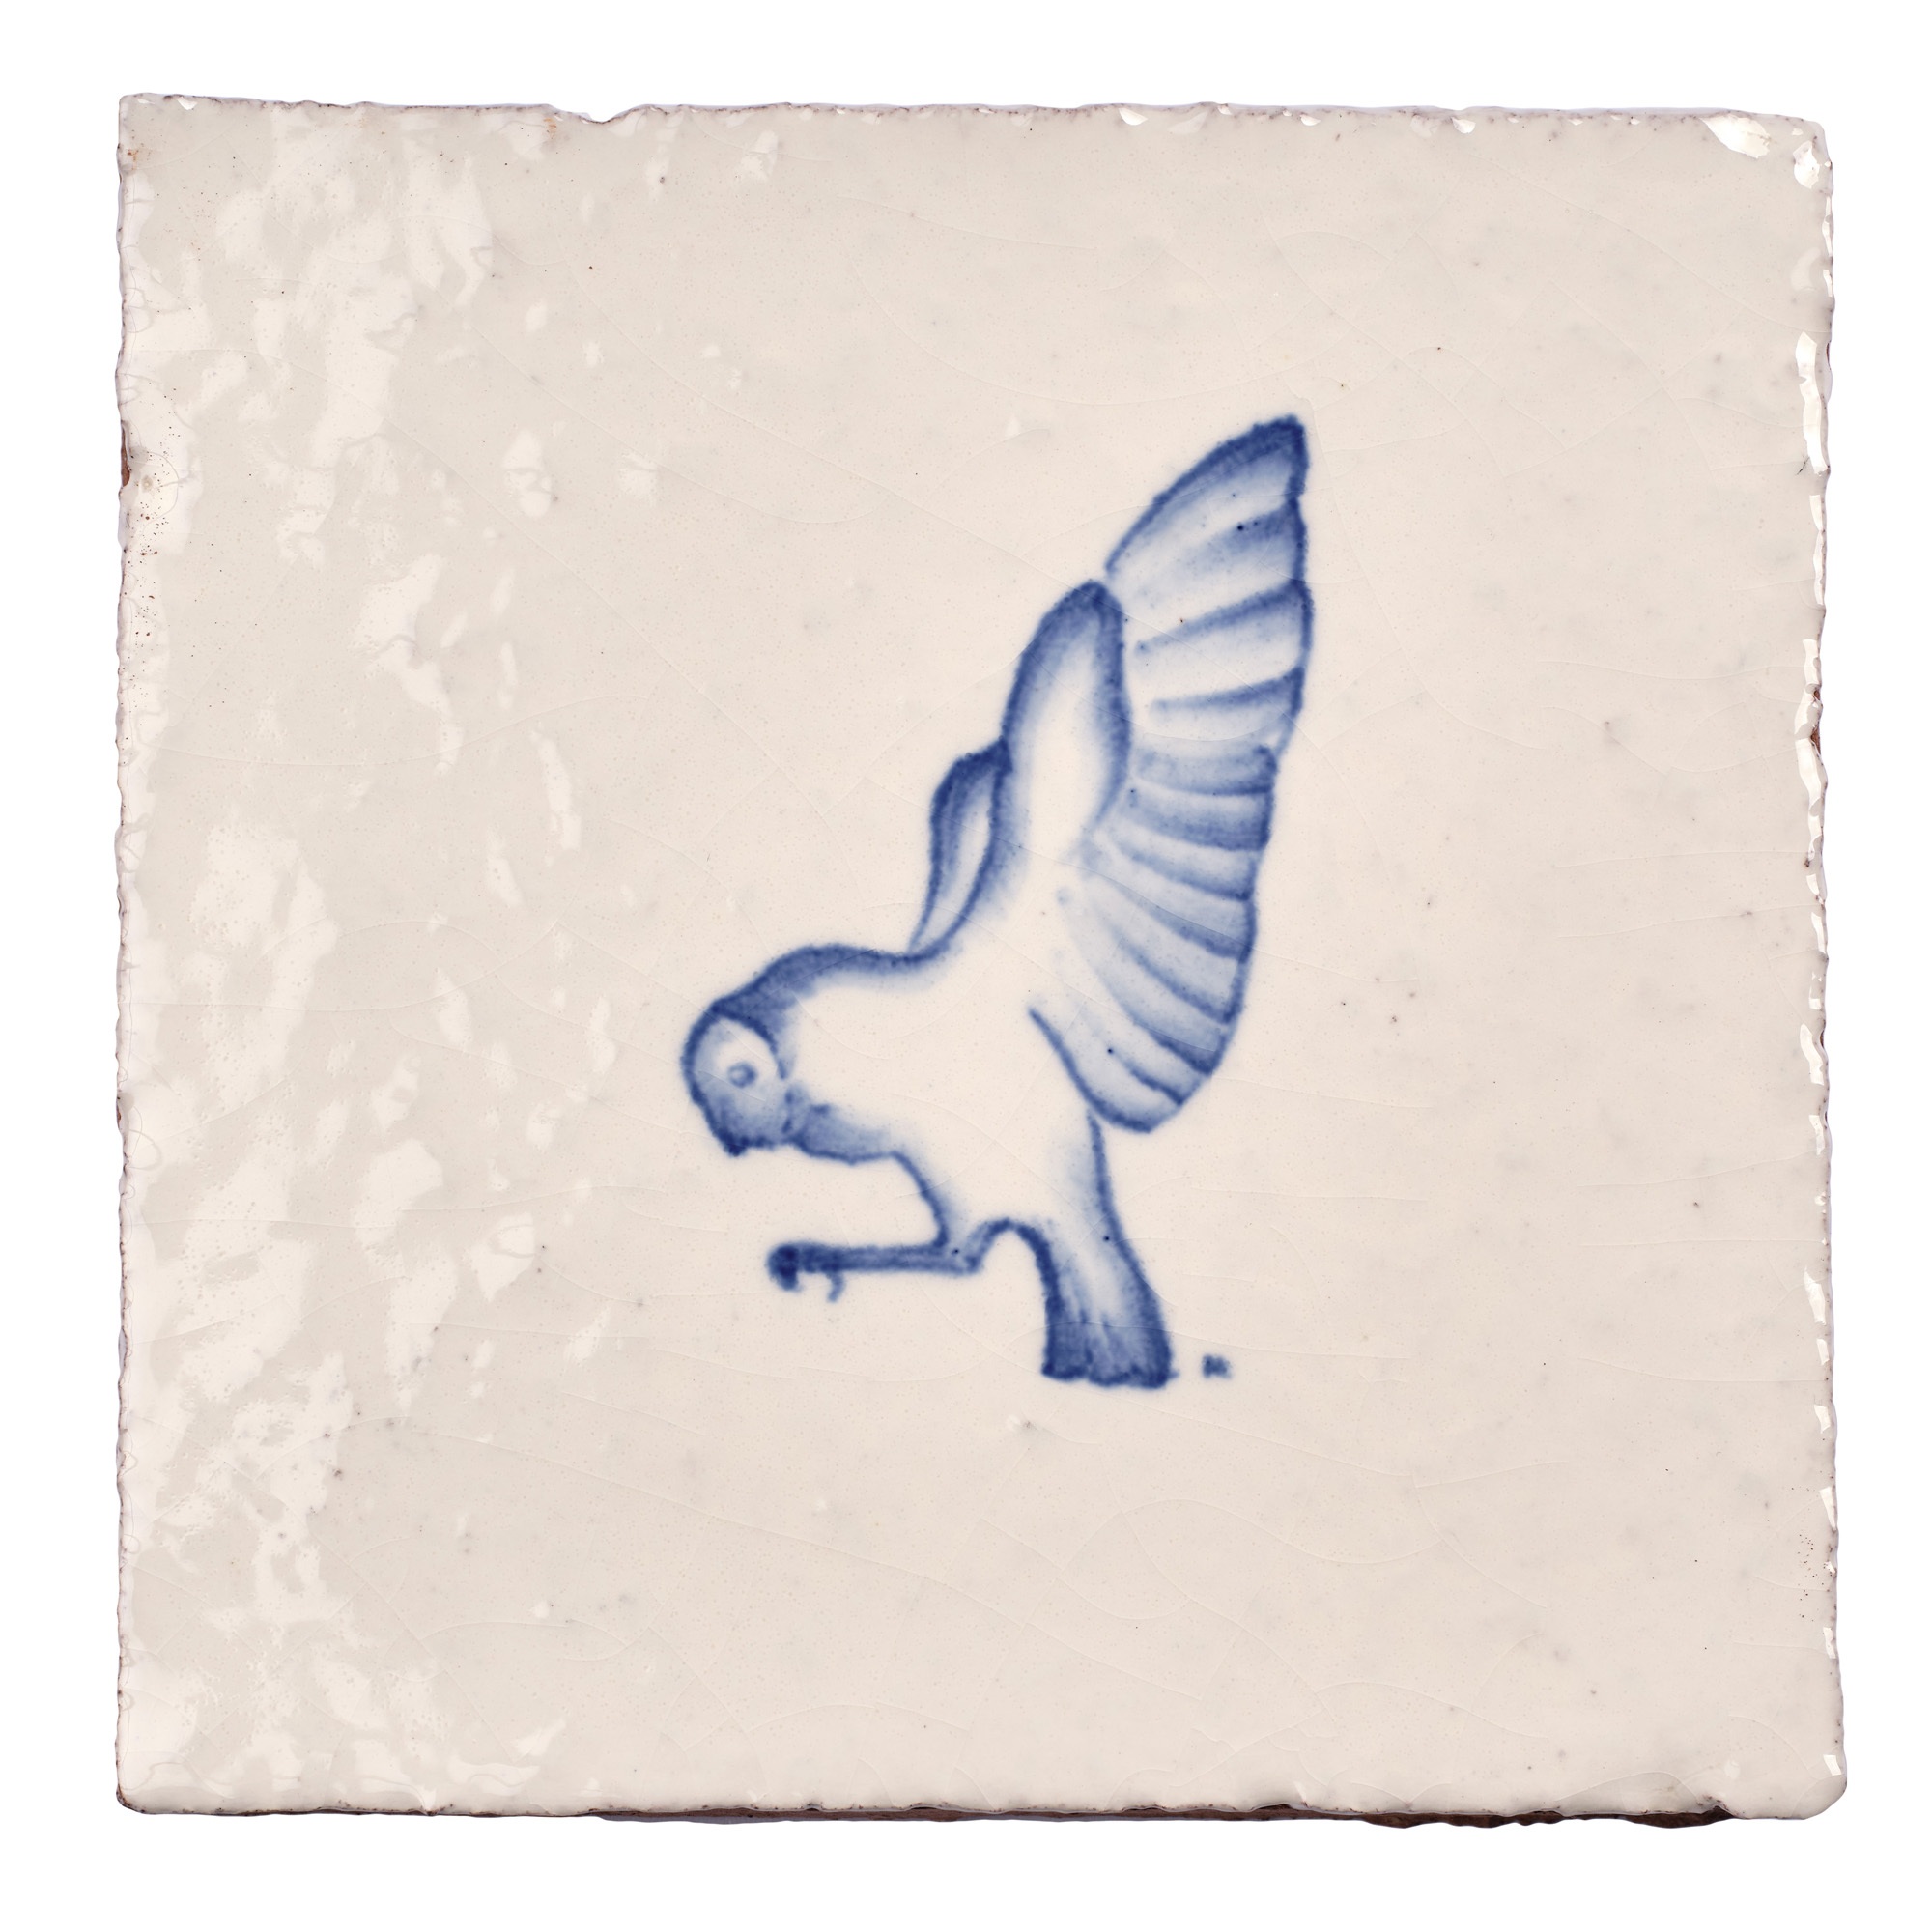 Wilding Owl Square, product variant image